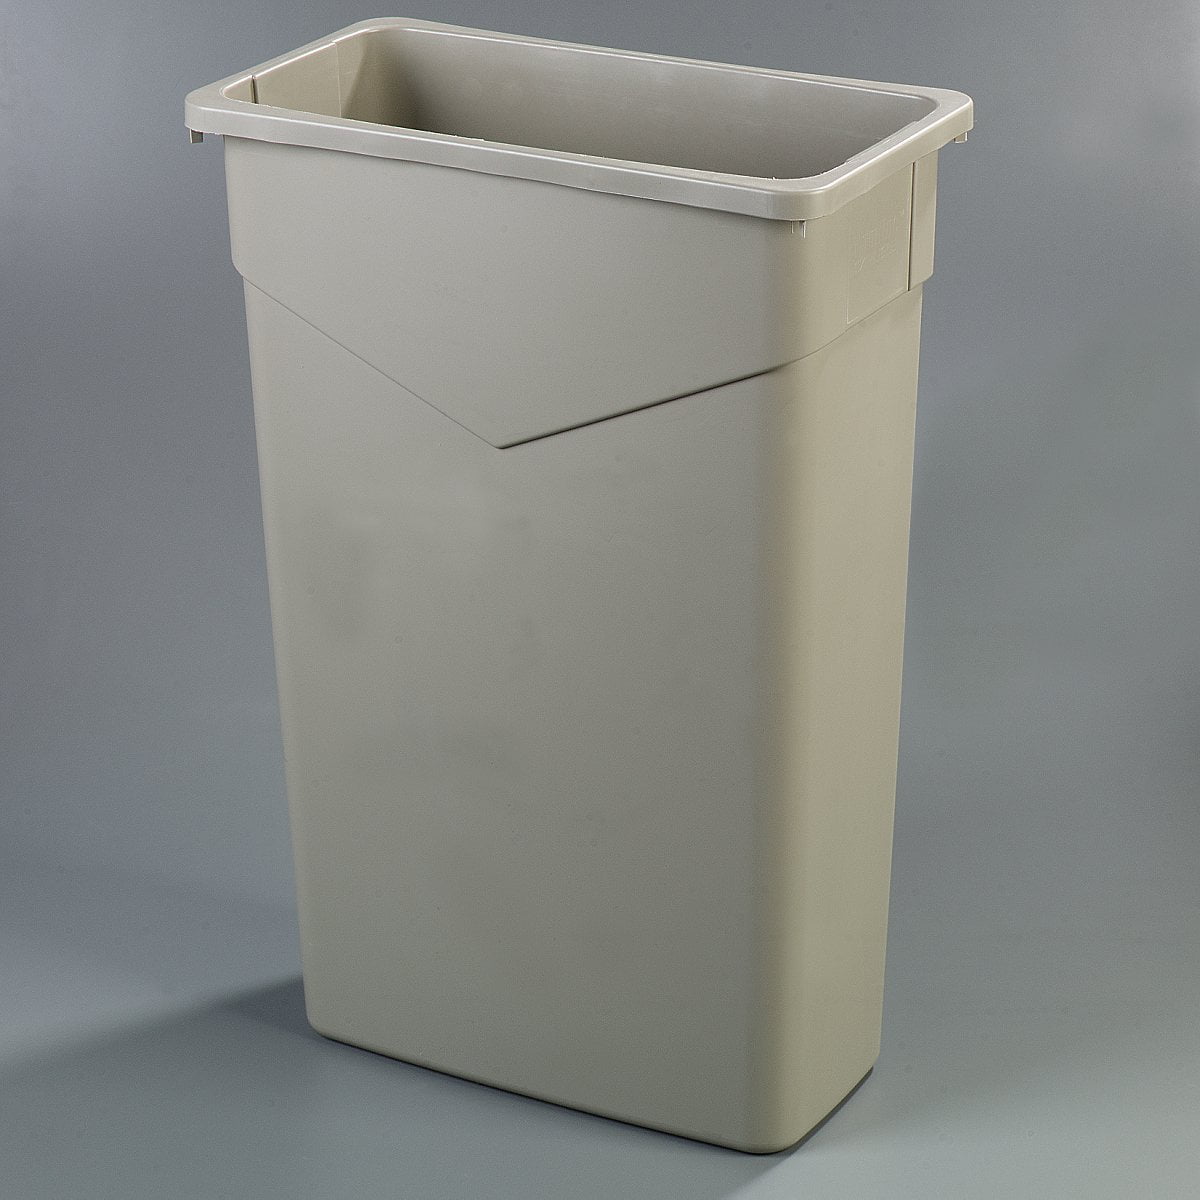 34201523 - TrimLine™ Rectangle Waste Container 15 Gallon - Gray